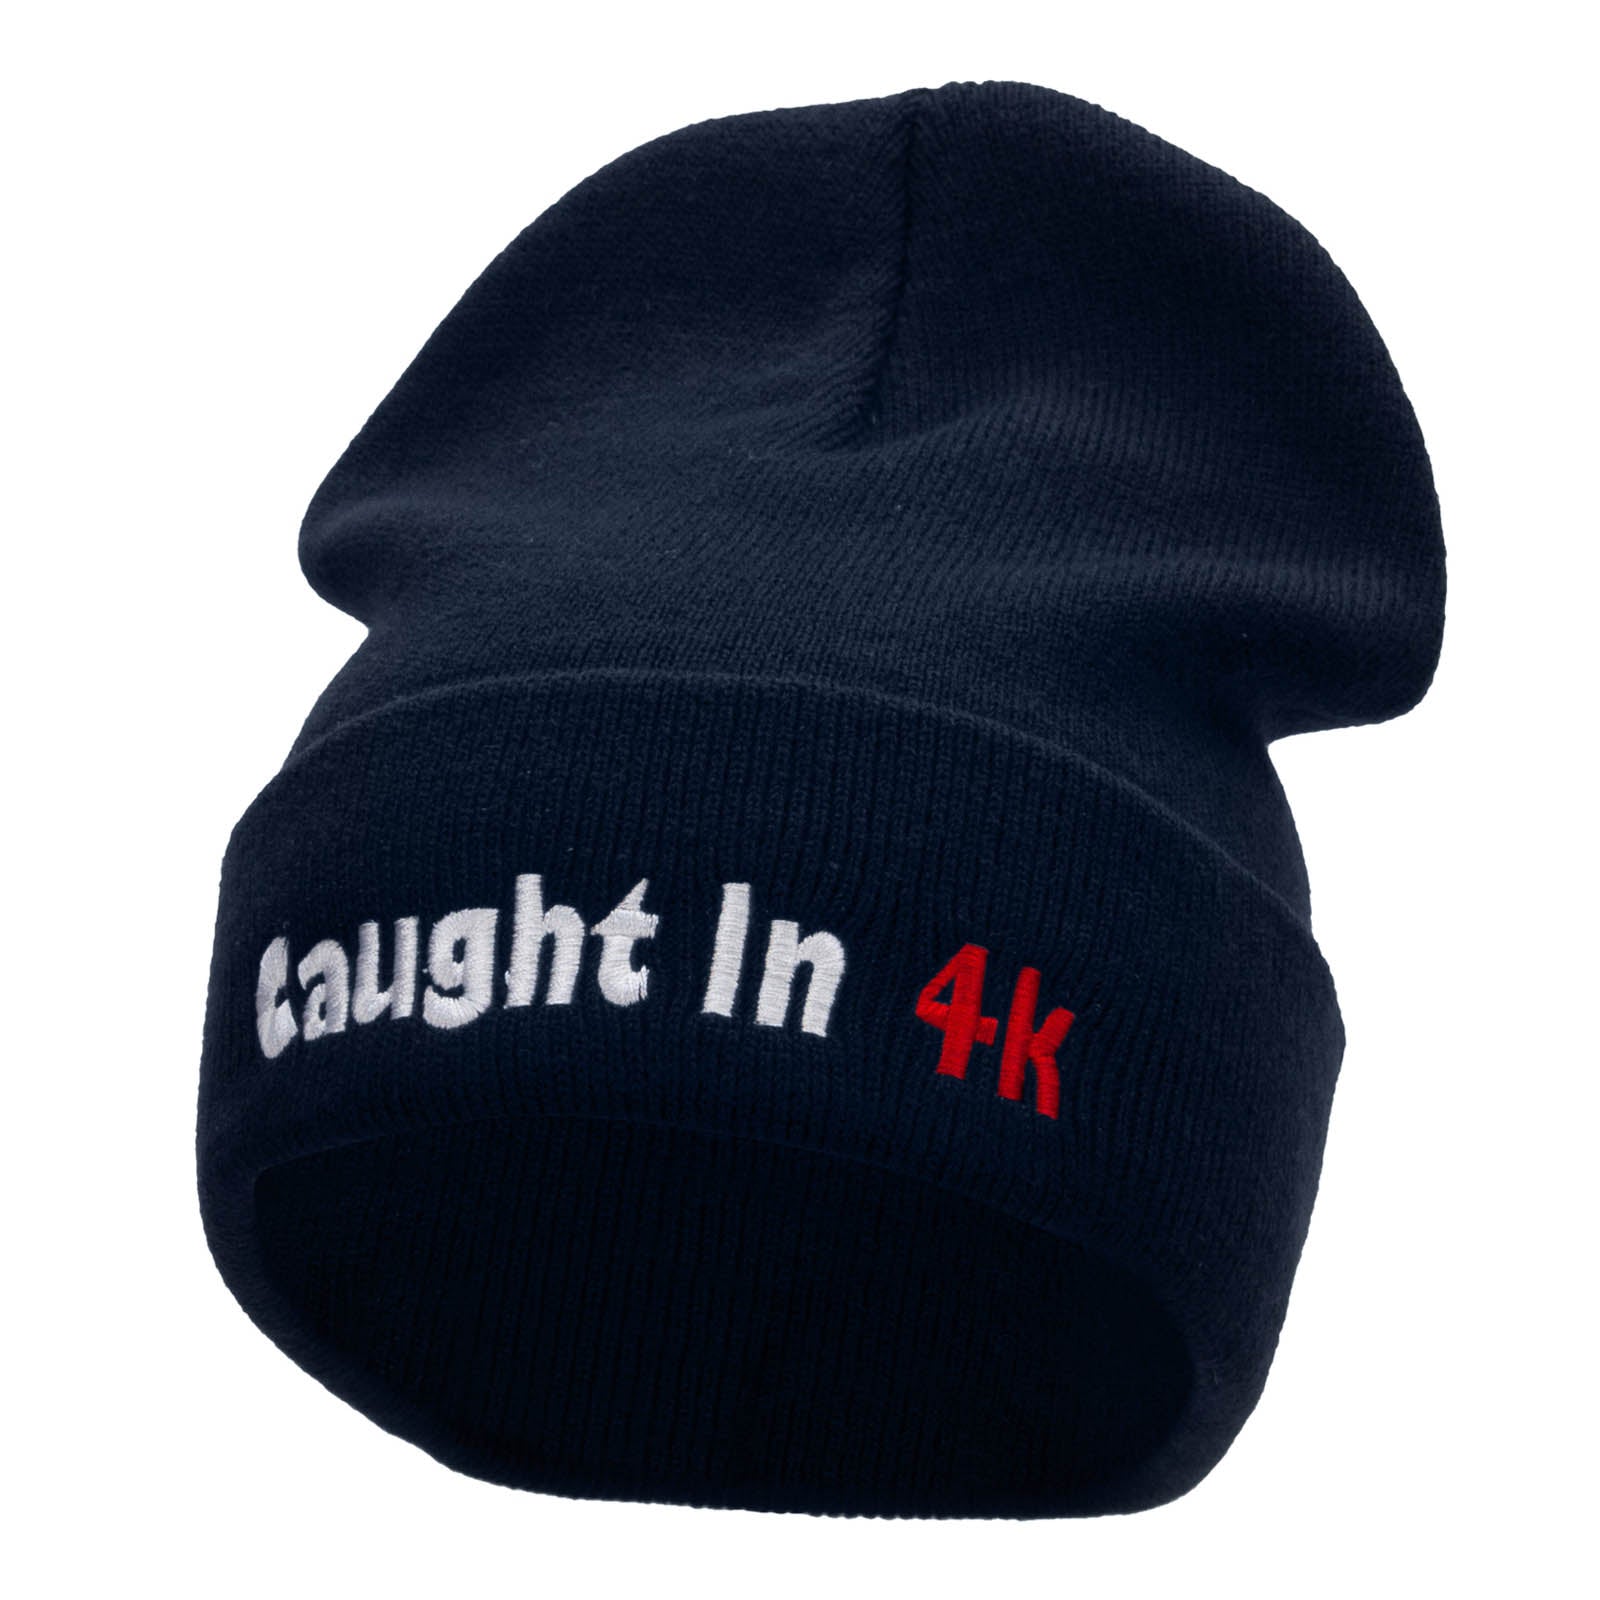 Caught in 4k Embroidered 12 Inch Long Knitted Beanie - Navy OSFM